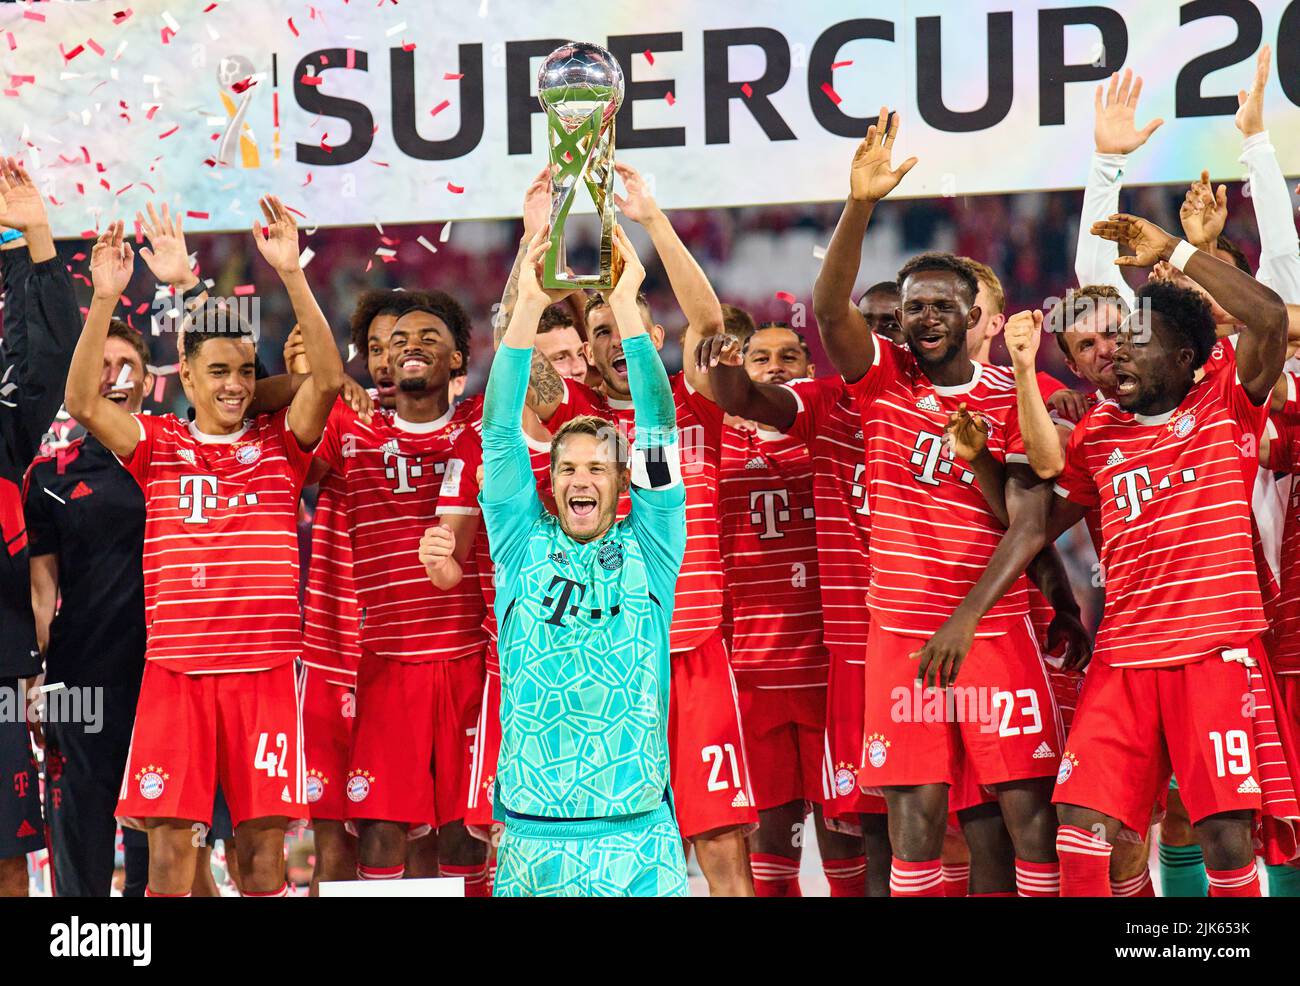 Leipzig, Germany. 30th July, 2022. Manuel NEUER, goalkeeper FCB 1   at winner ceremony with team mates after the match RB LEIPZIG - FC BAYERN MÜNCHEN 3-5 DFL SUPERCUP, 1. German Football League,  in Leipzig, July 30, 2022  Season 2022/2023 © Peter Schatz / Alamy Live News Credit: Peter Schatz/Alamy Live News Stock Photo